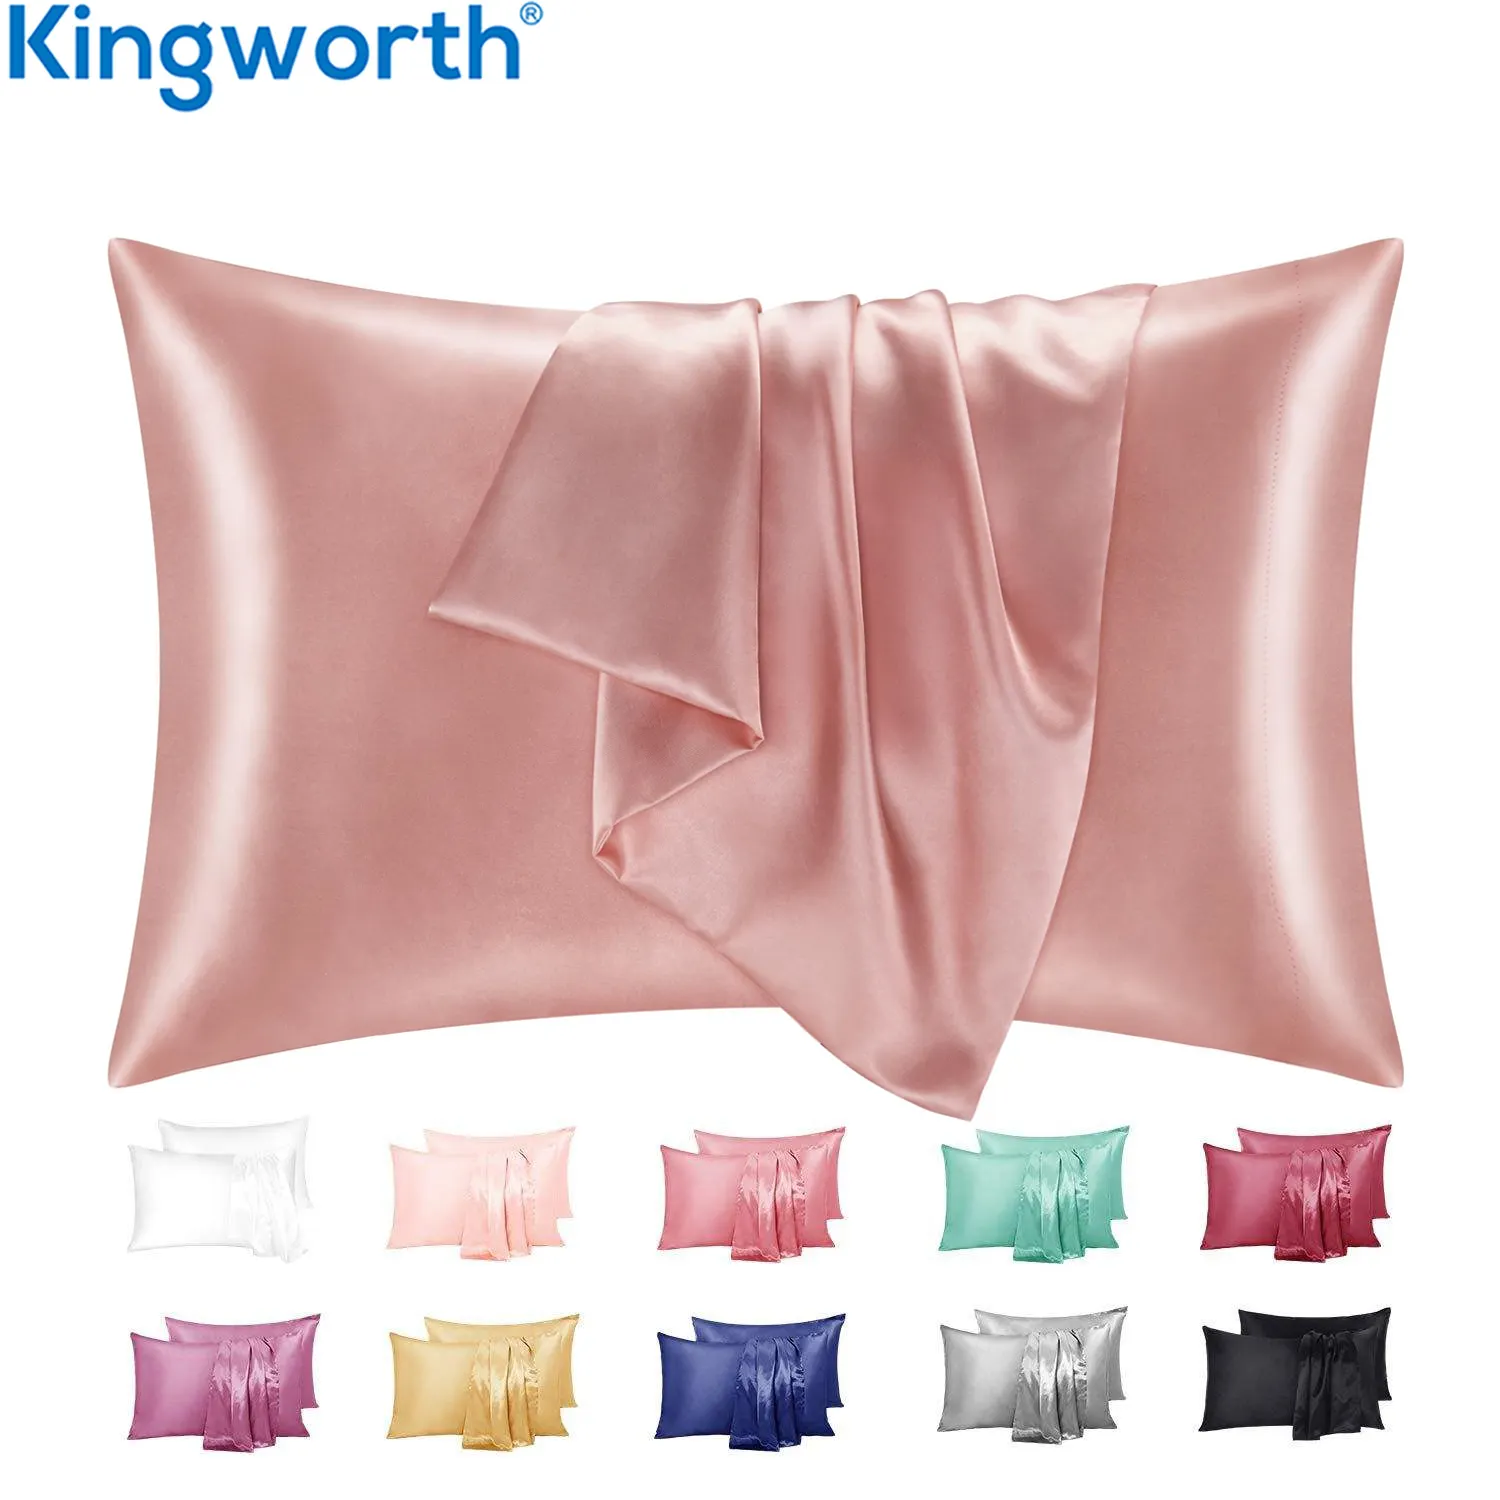 Customized King Queen Size Custom Travel Wholesale Pink Satin Luxury Neck Silk Pillow Cases Silk Pillows Cover Set With Logo